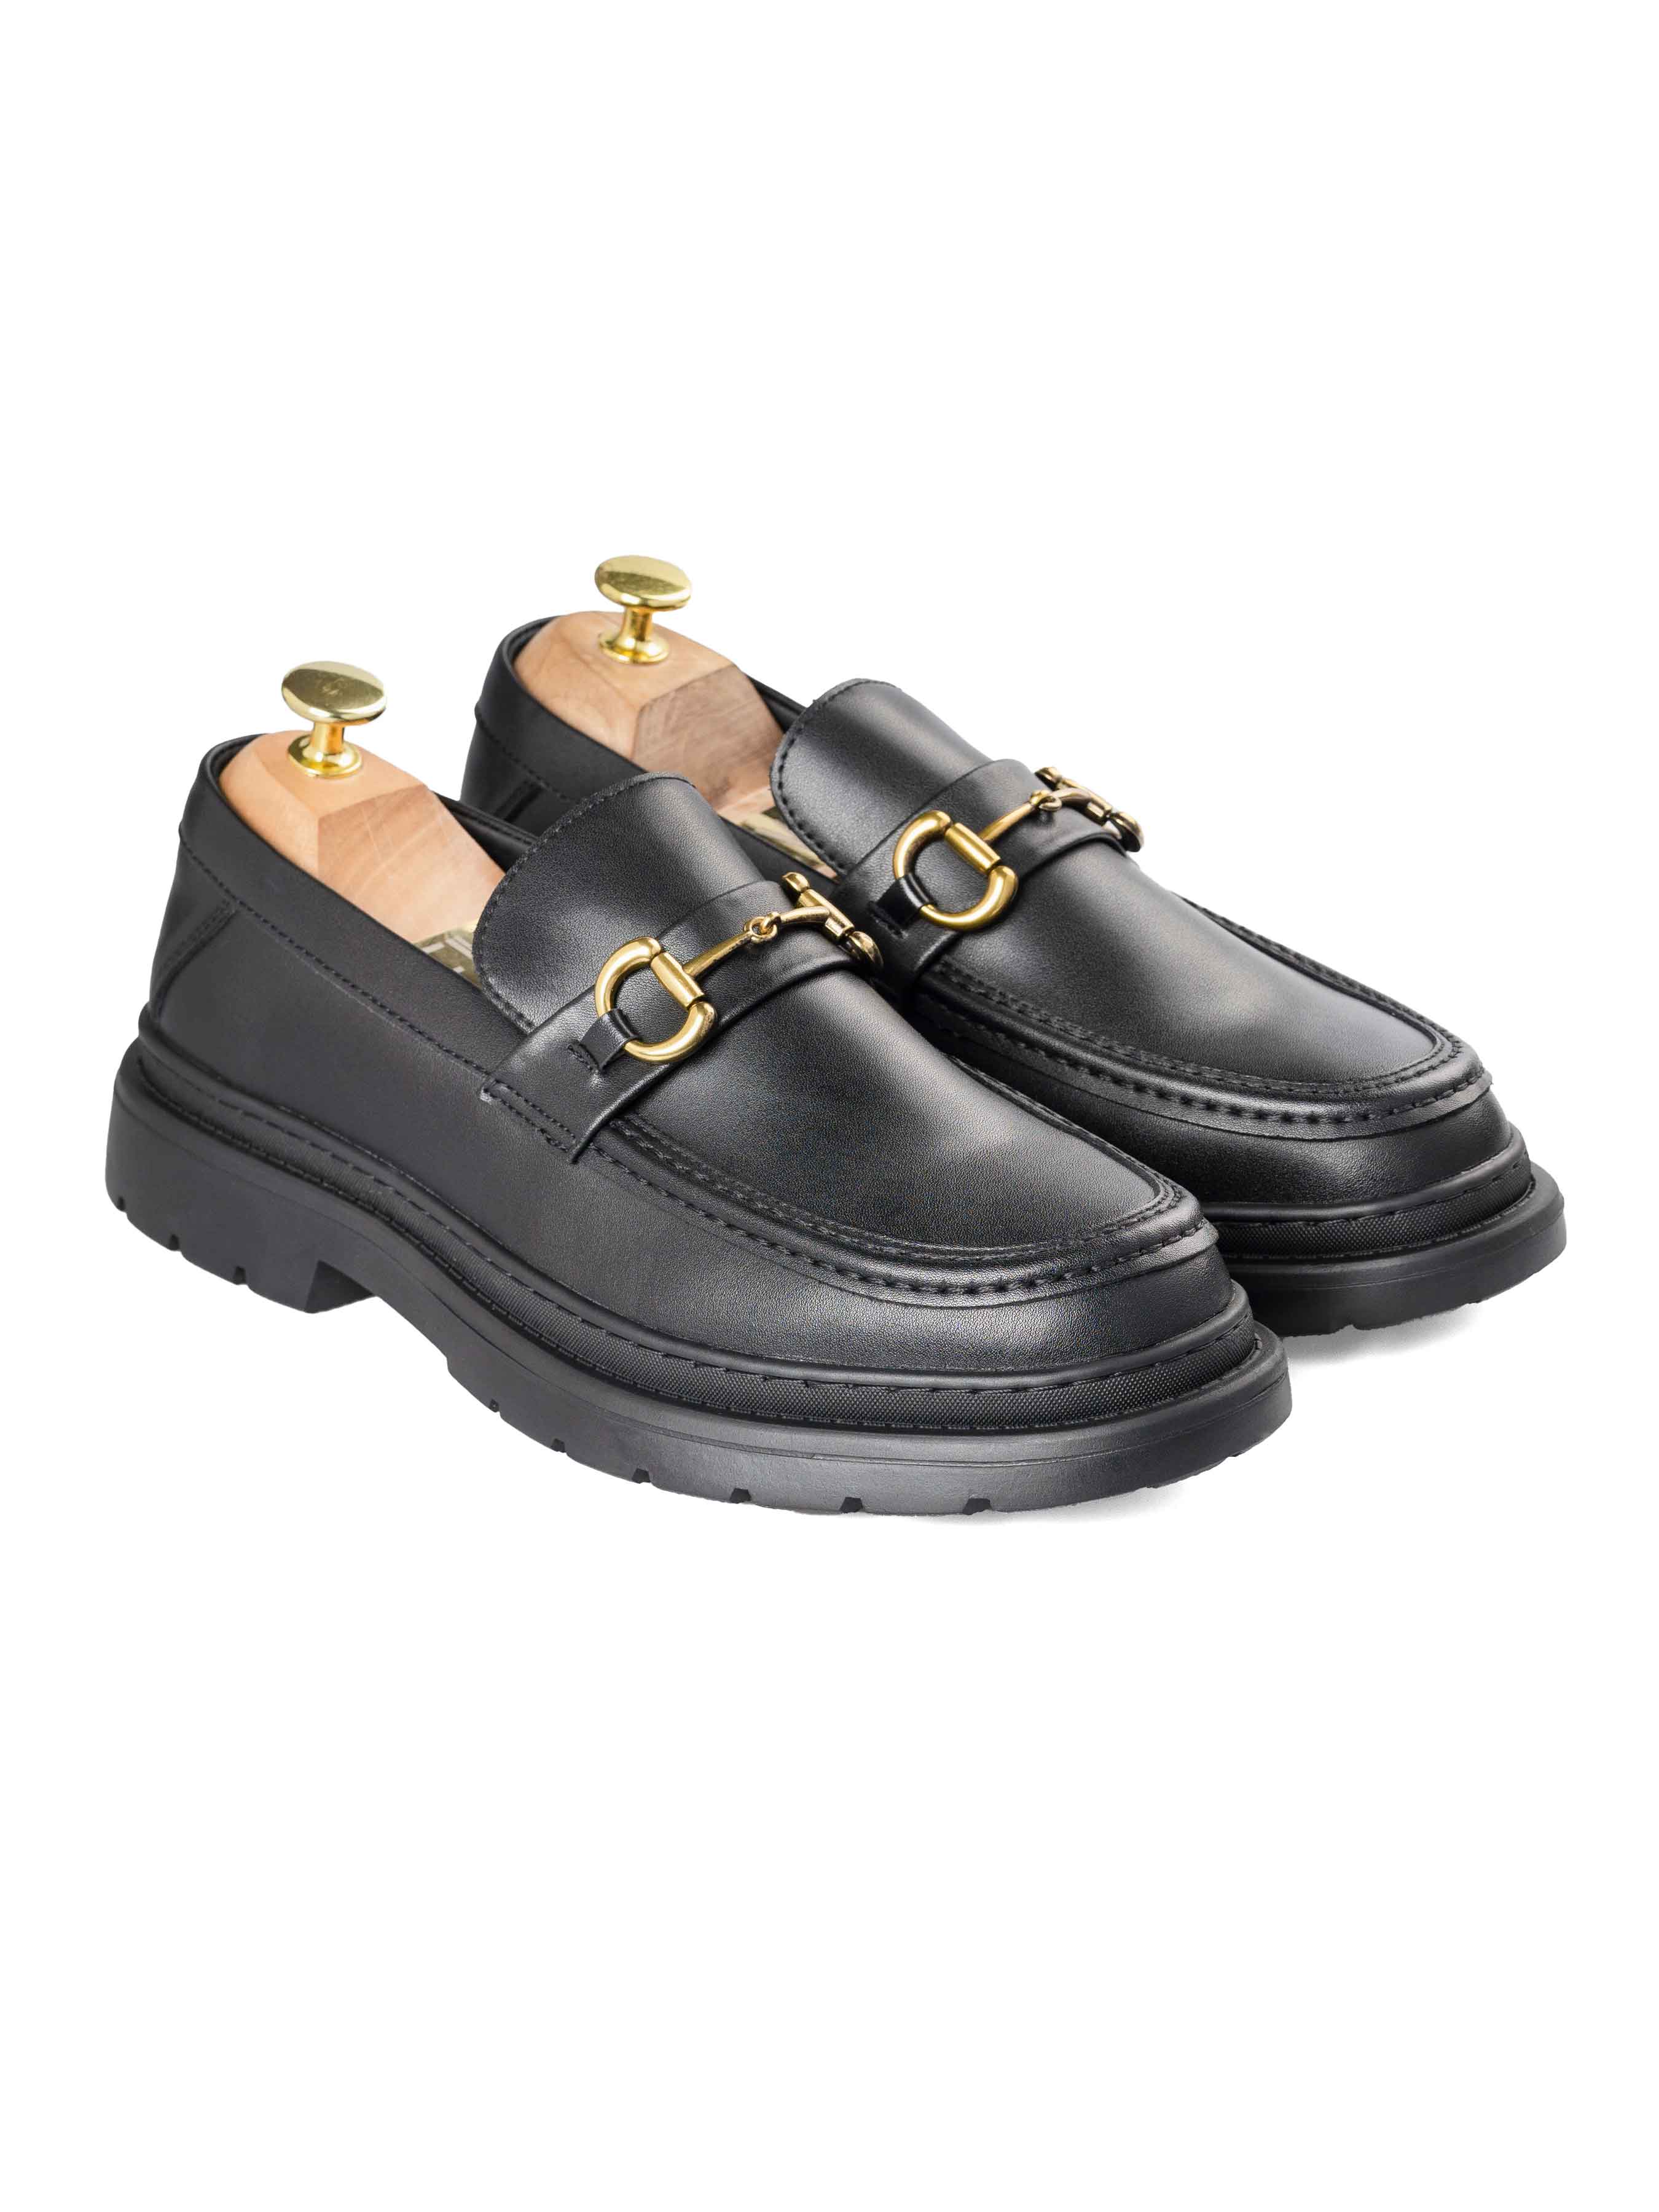 Maurice Moccasin Buckle Loafer - Solid Black (Chunky Sole)